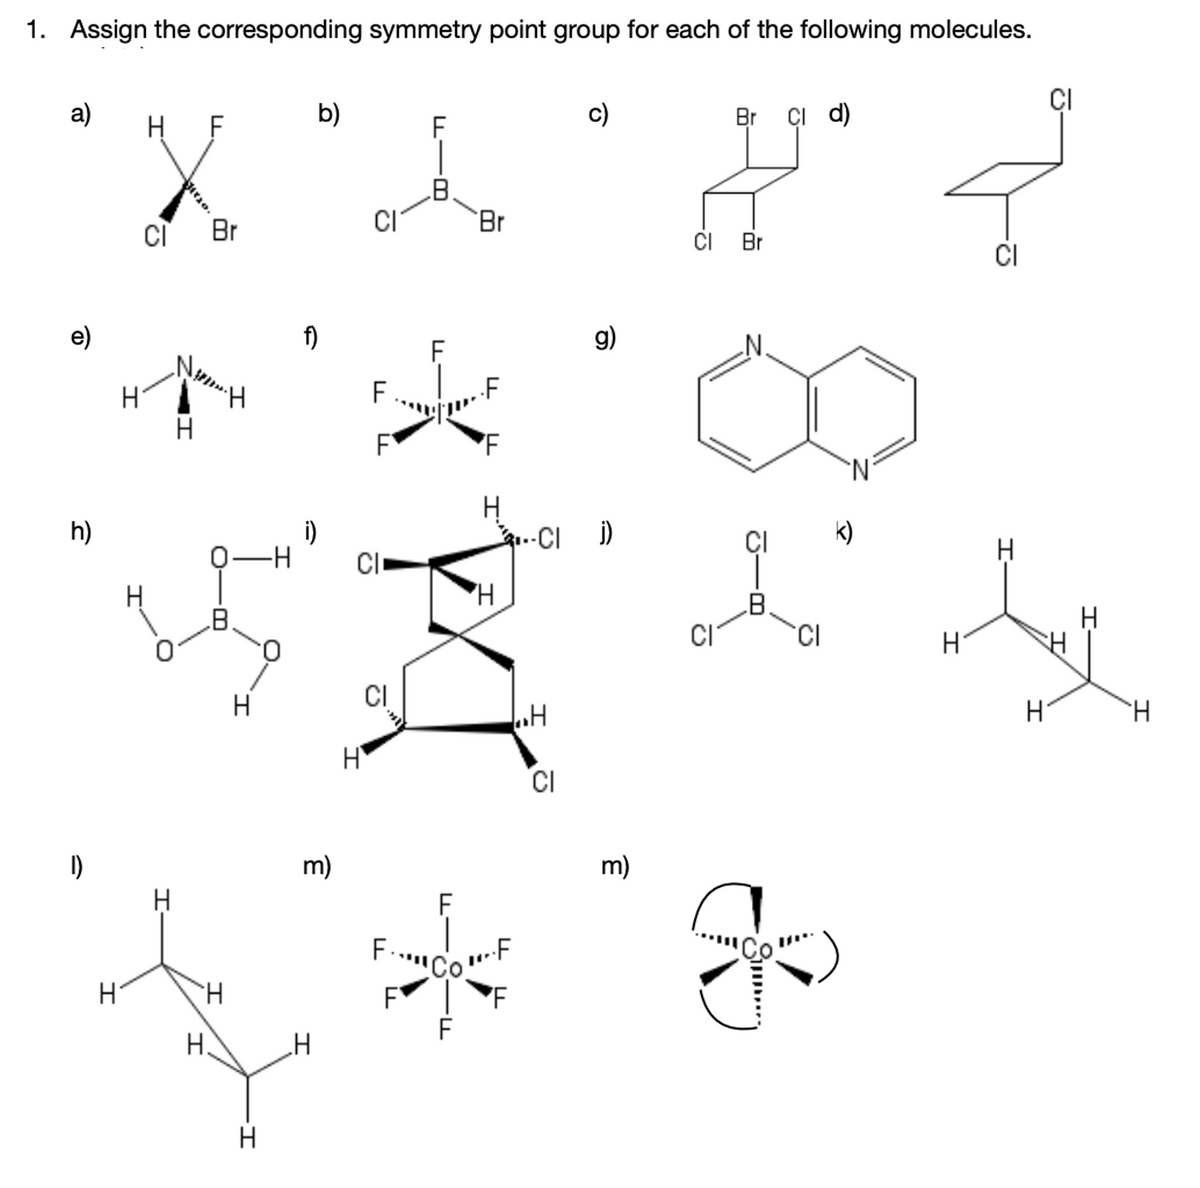 1. Assign the corresponding symmetry point group for each of the following molecules.
CI
a)
H F
b)
c)
Br çi d)
Br
CI
Br
CI Br
CI
e)
f)
g)
H.
H.
F
h)
i)
CI
..-CI )
ÇI
k)
H.
CI
0.
H.
CI
H
H.
CI
I)
m)
m)
CoF
H.
H.
H
H.
Si..
I'
u-8-
L -B
II
